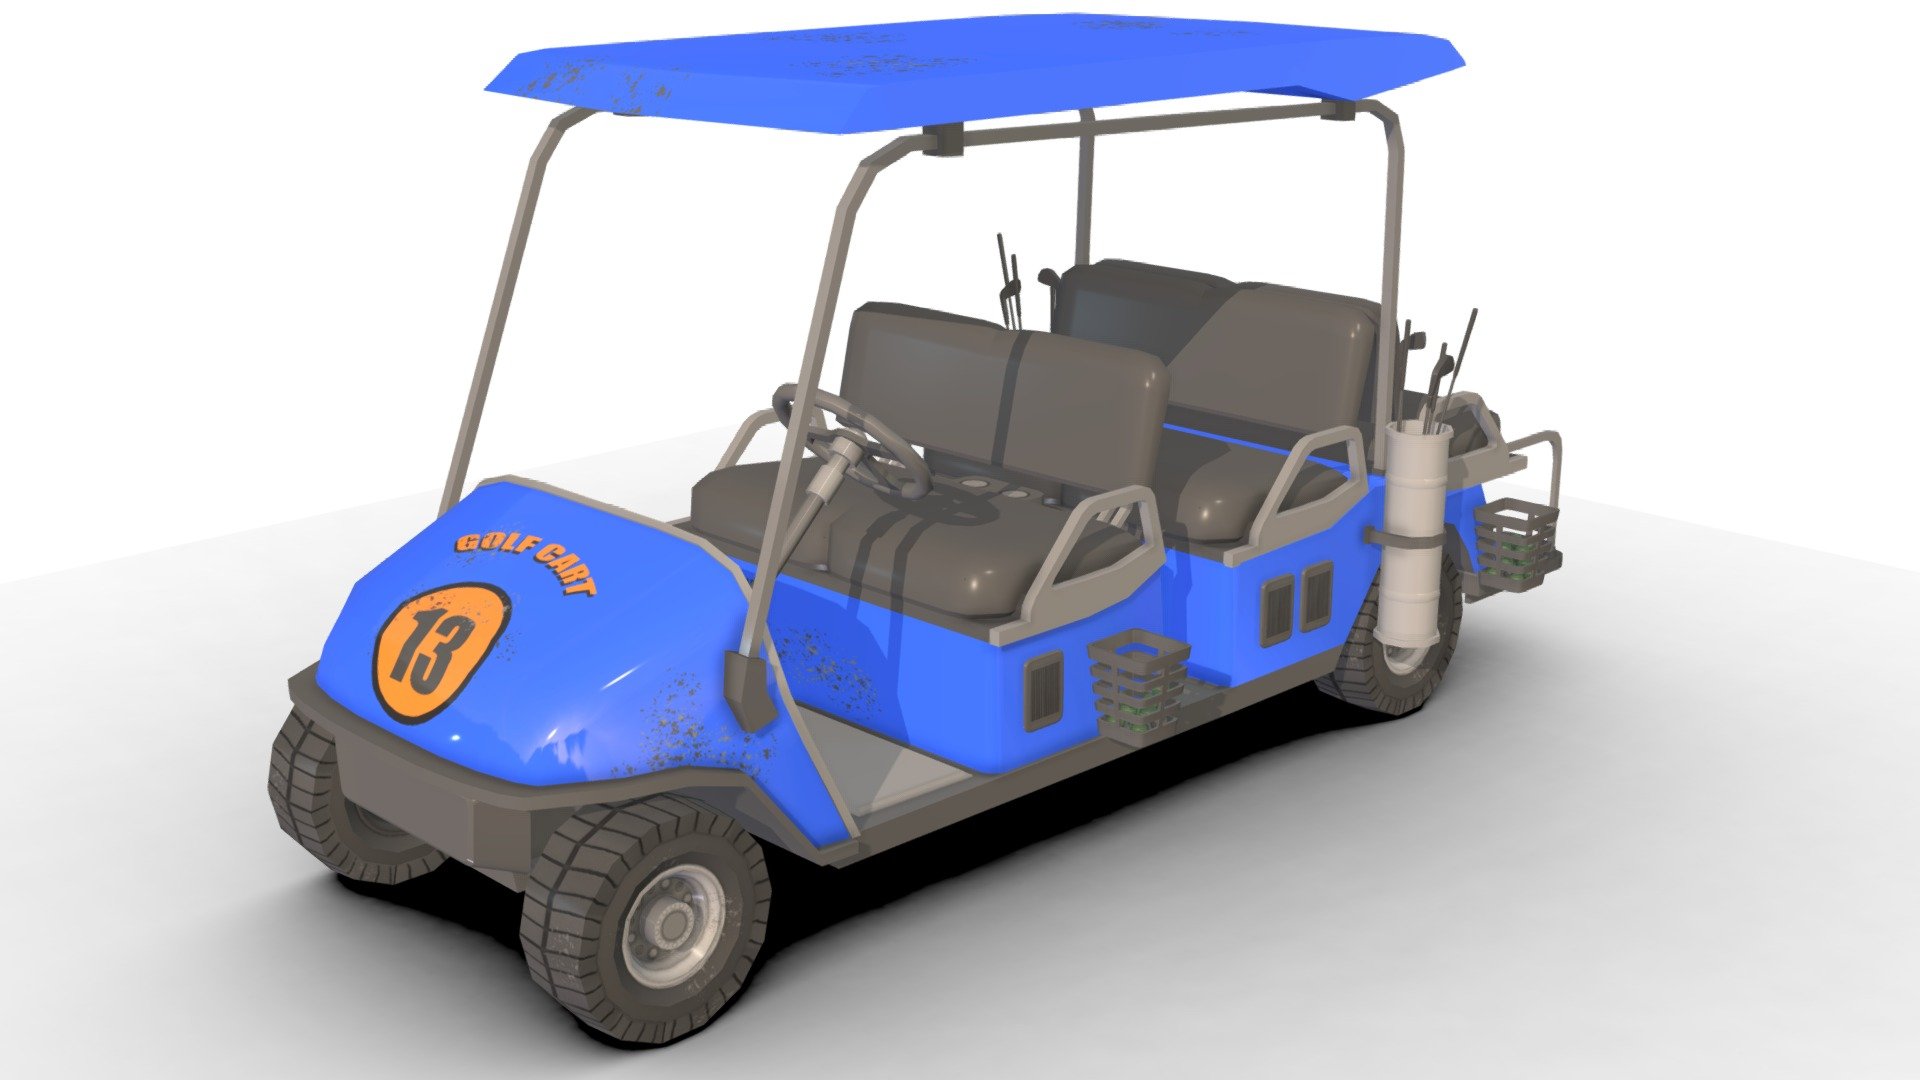 Golf Cart Low_Poly .

You can use these models in any game and project.

This model is made with order and precision.

Separated parts (bodys . wheels . Steer ).

Very Low- Poly.

Truck have separate parts.

Average poly count: 15,000 tris.

Texture size: 2048 / 1024 (PNG).

Number of textures: 2.

Number of materials: 3.

Format: Fbx / Obj / 3DMax .

The original files are in the Additional file .

Wait for my new models.. Your friend (Sidra) 3d model